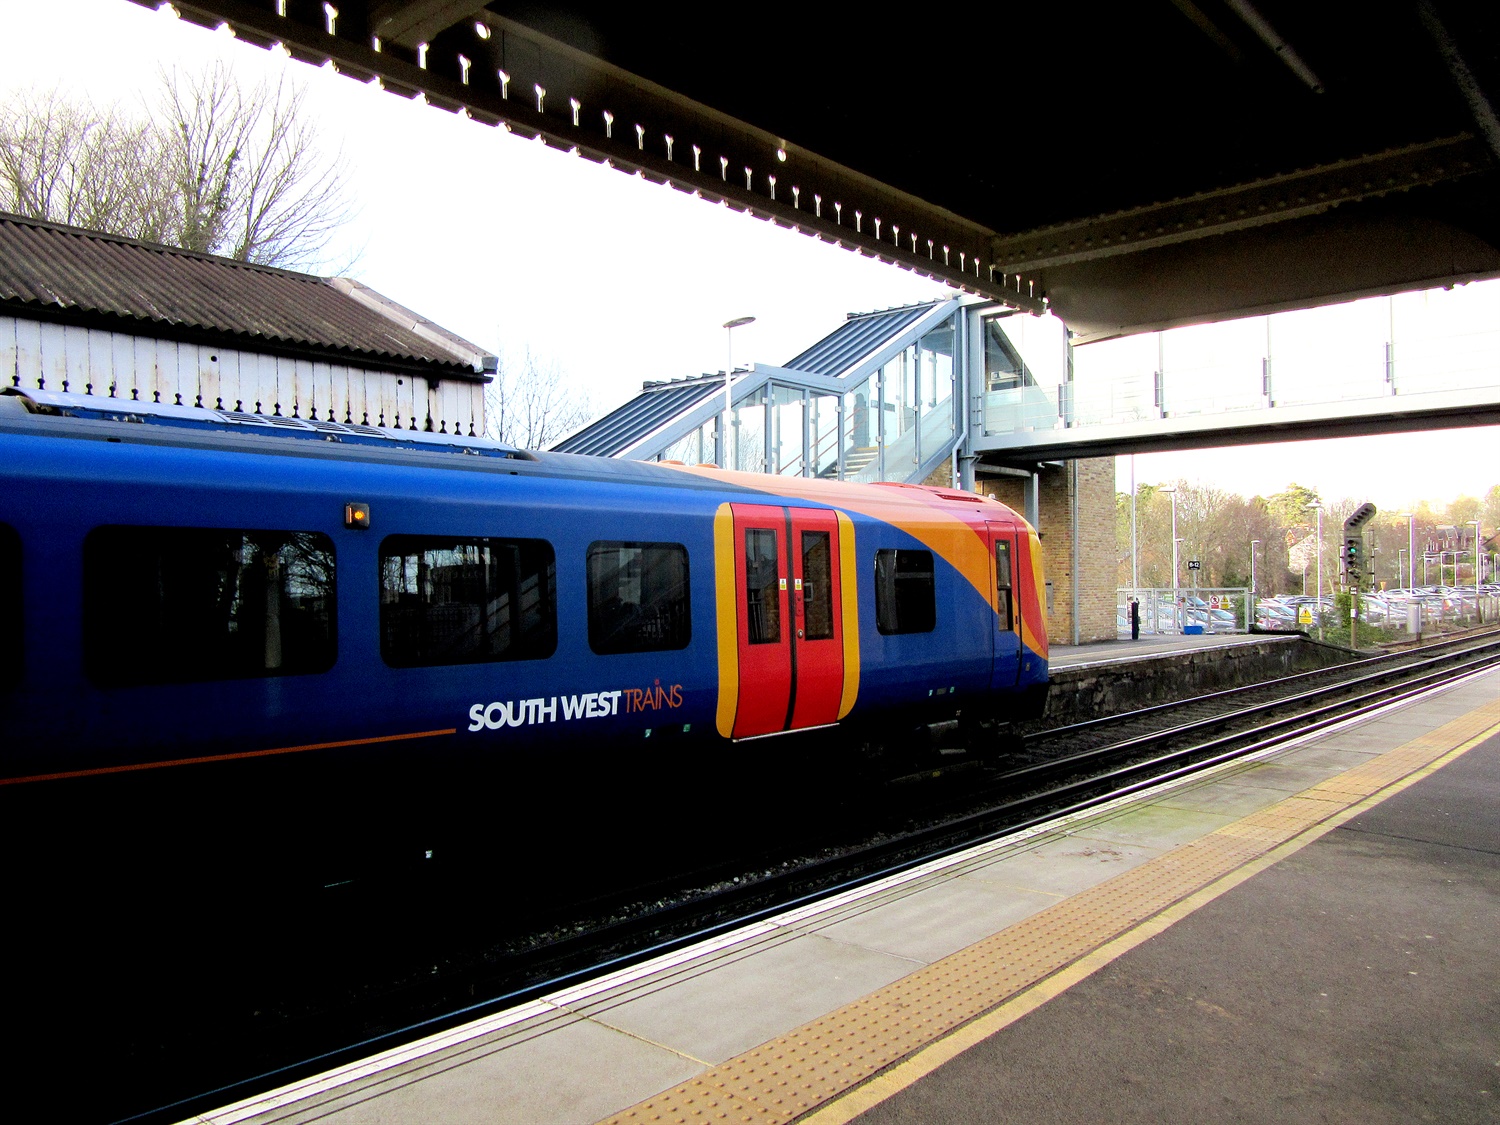 Building passenger trust in the new South West franchise